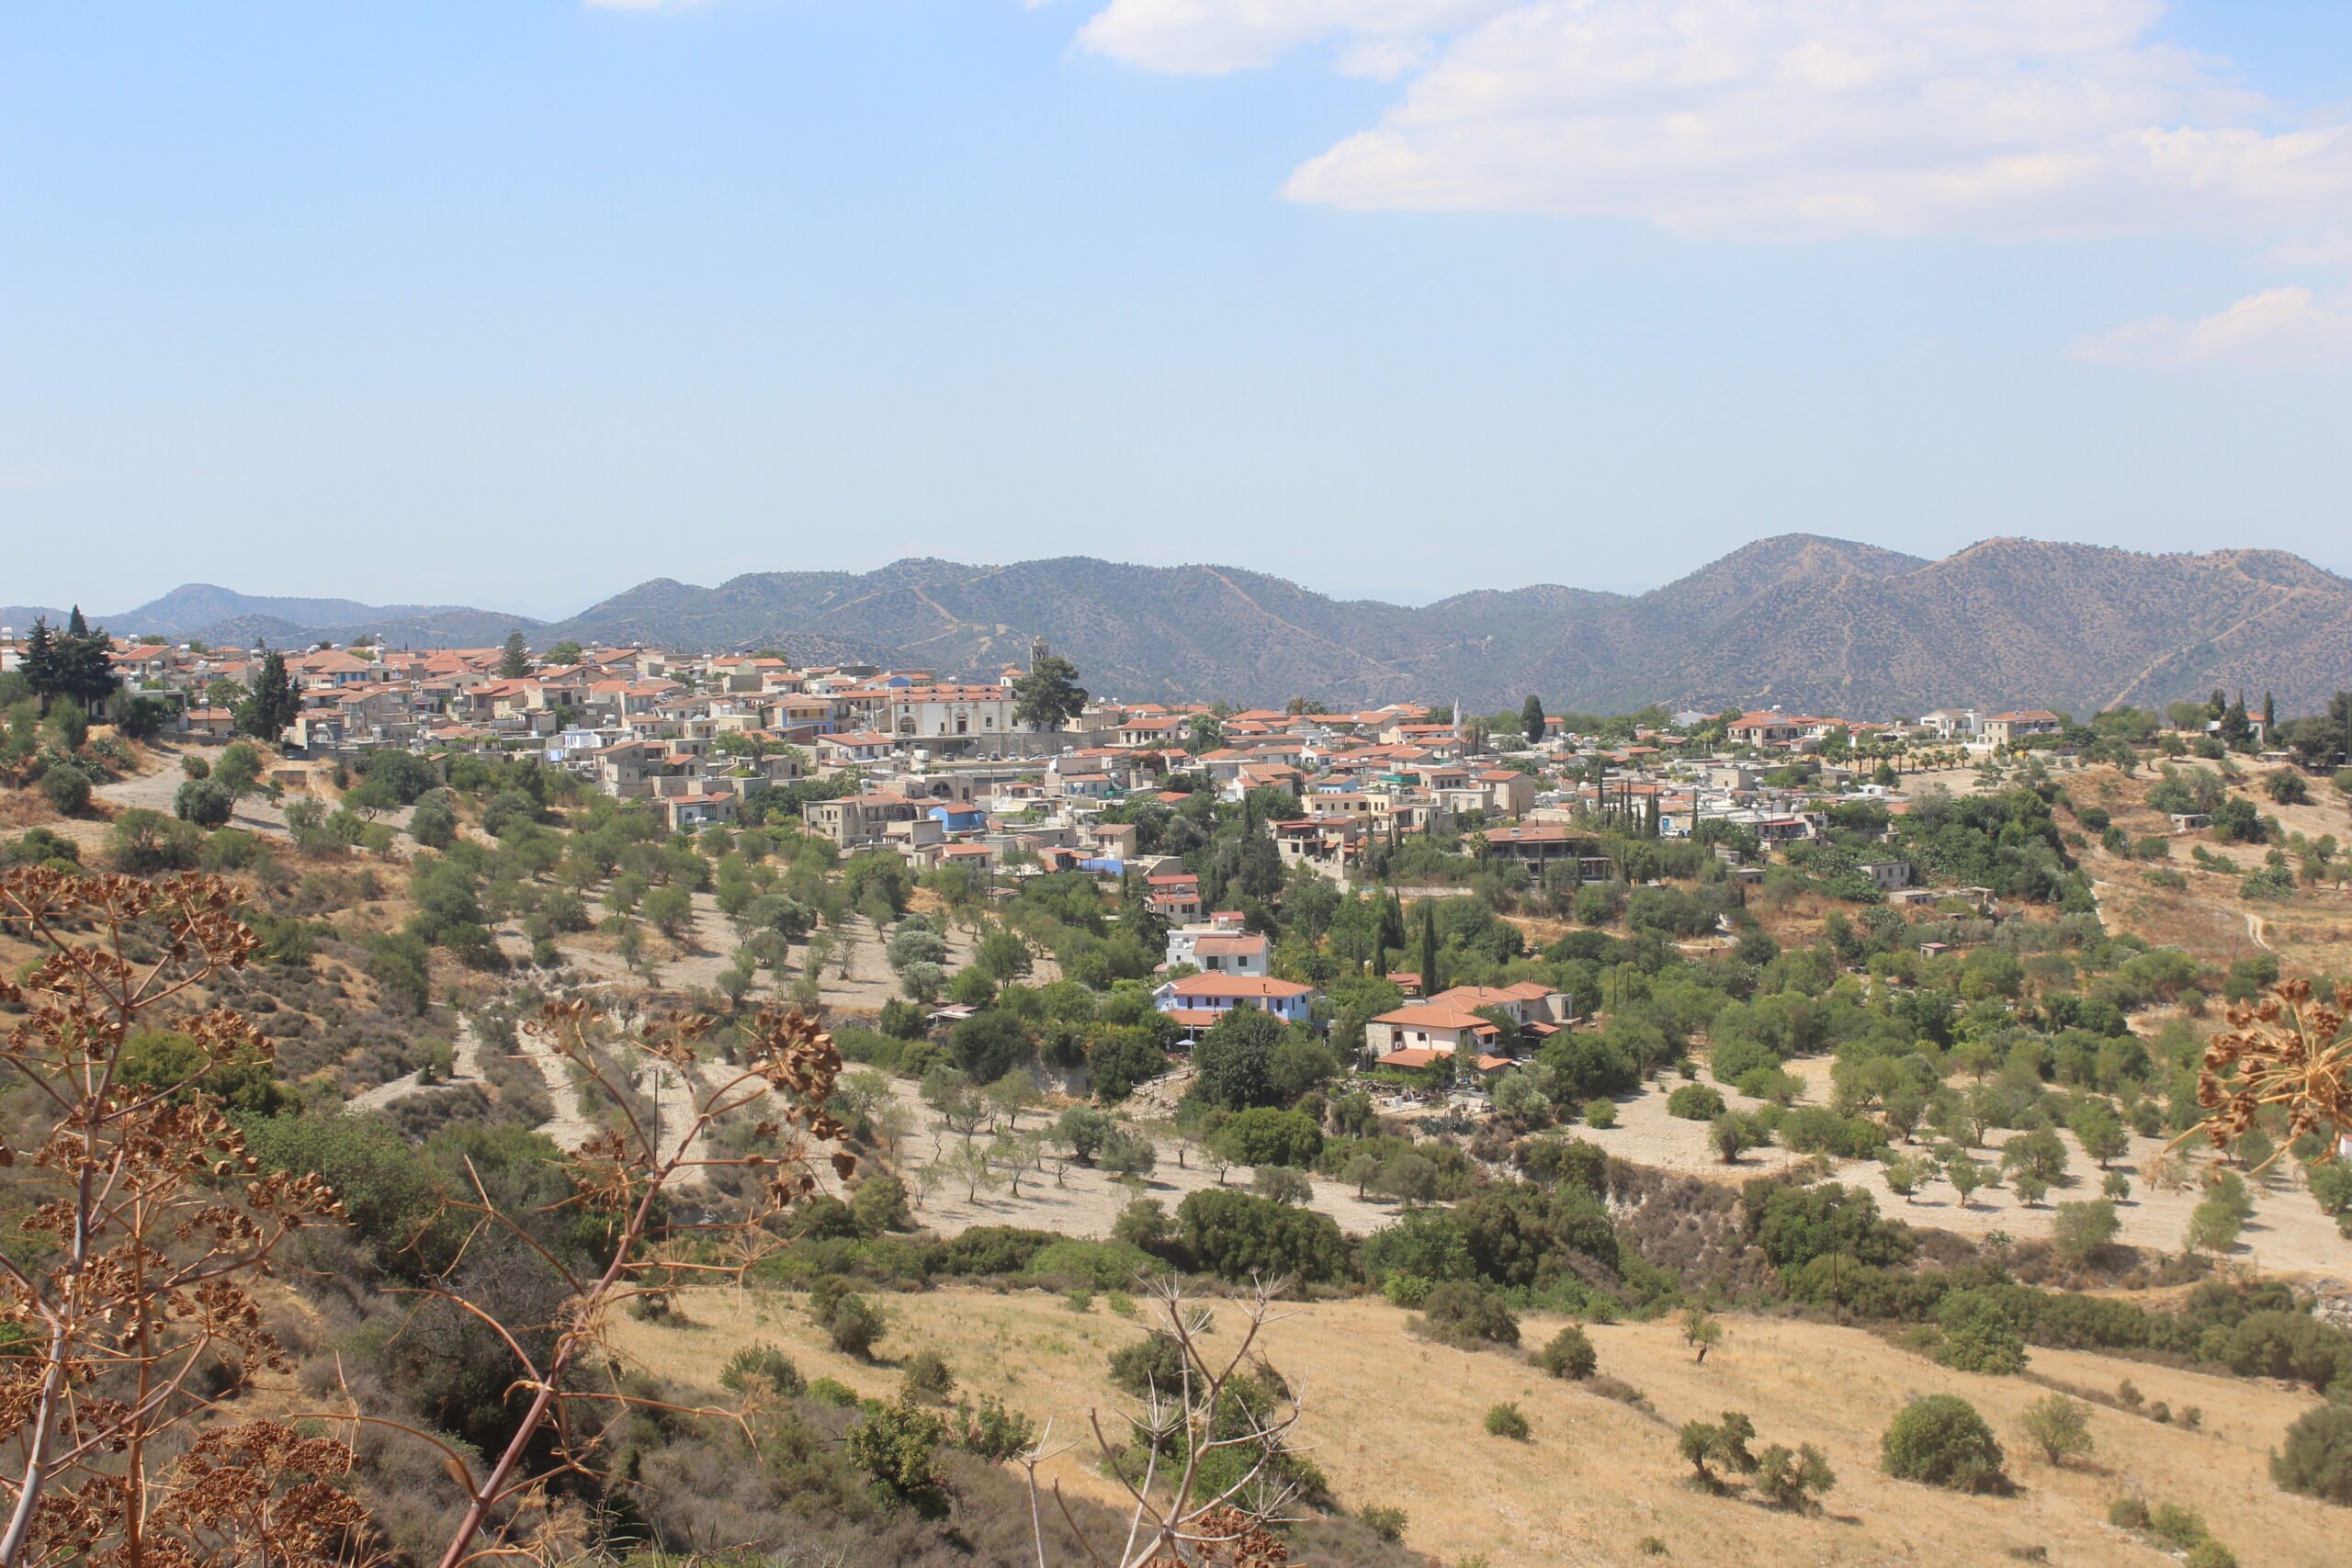 beautiful pano lefkara. in its heyday, 5,000 people lived there, now 850 and with many crumbling and empty houses and very few lace makers and average age 70 years old